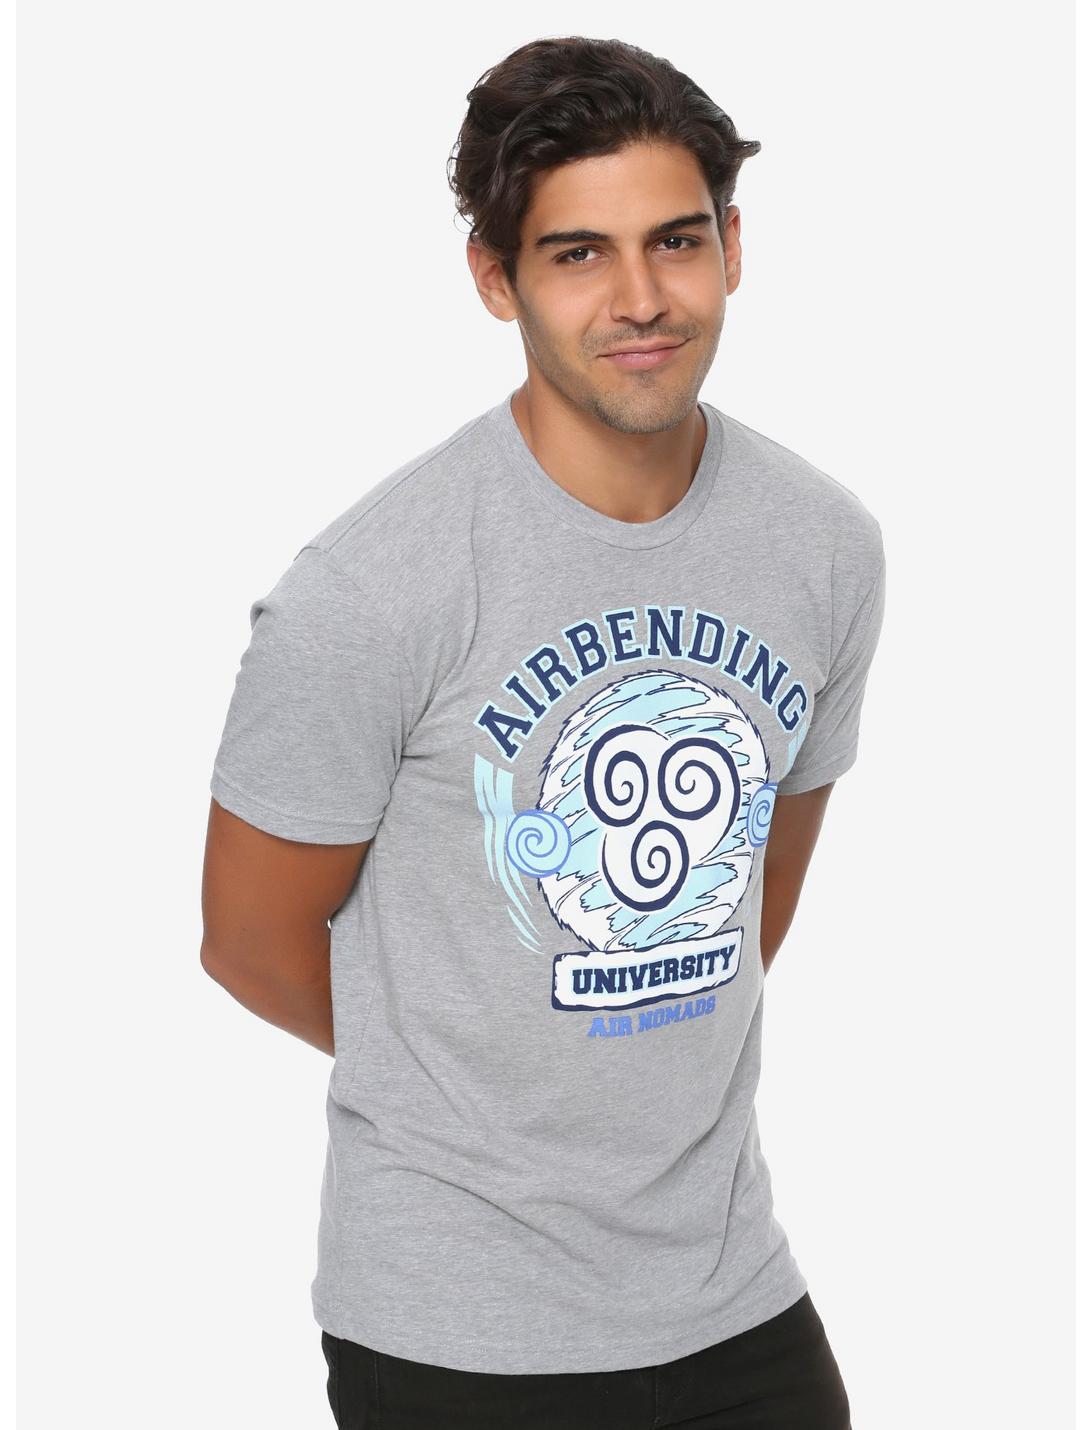 Avatar: The Last Airbender Airbending University T-Shirt - BoxLunch Exclusive, GREY, hi-res